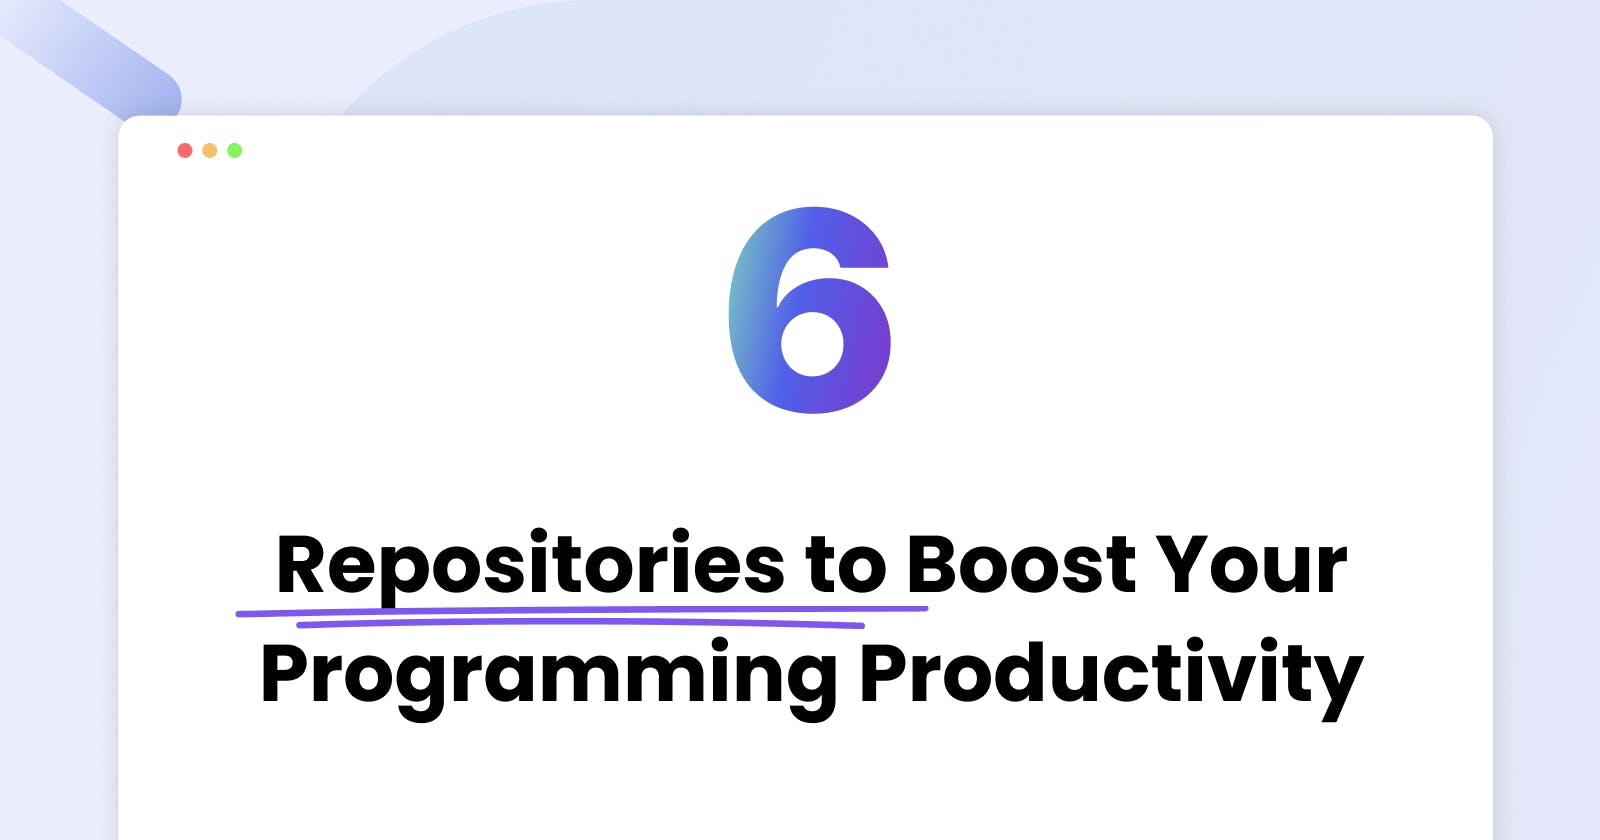 6 Repositories recommended by GitHub to Boost Your Programming Productivity